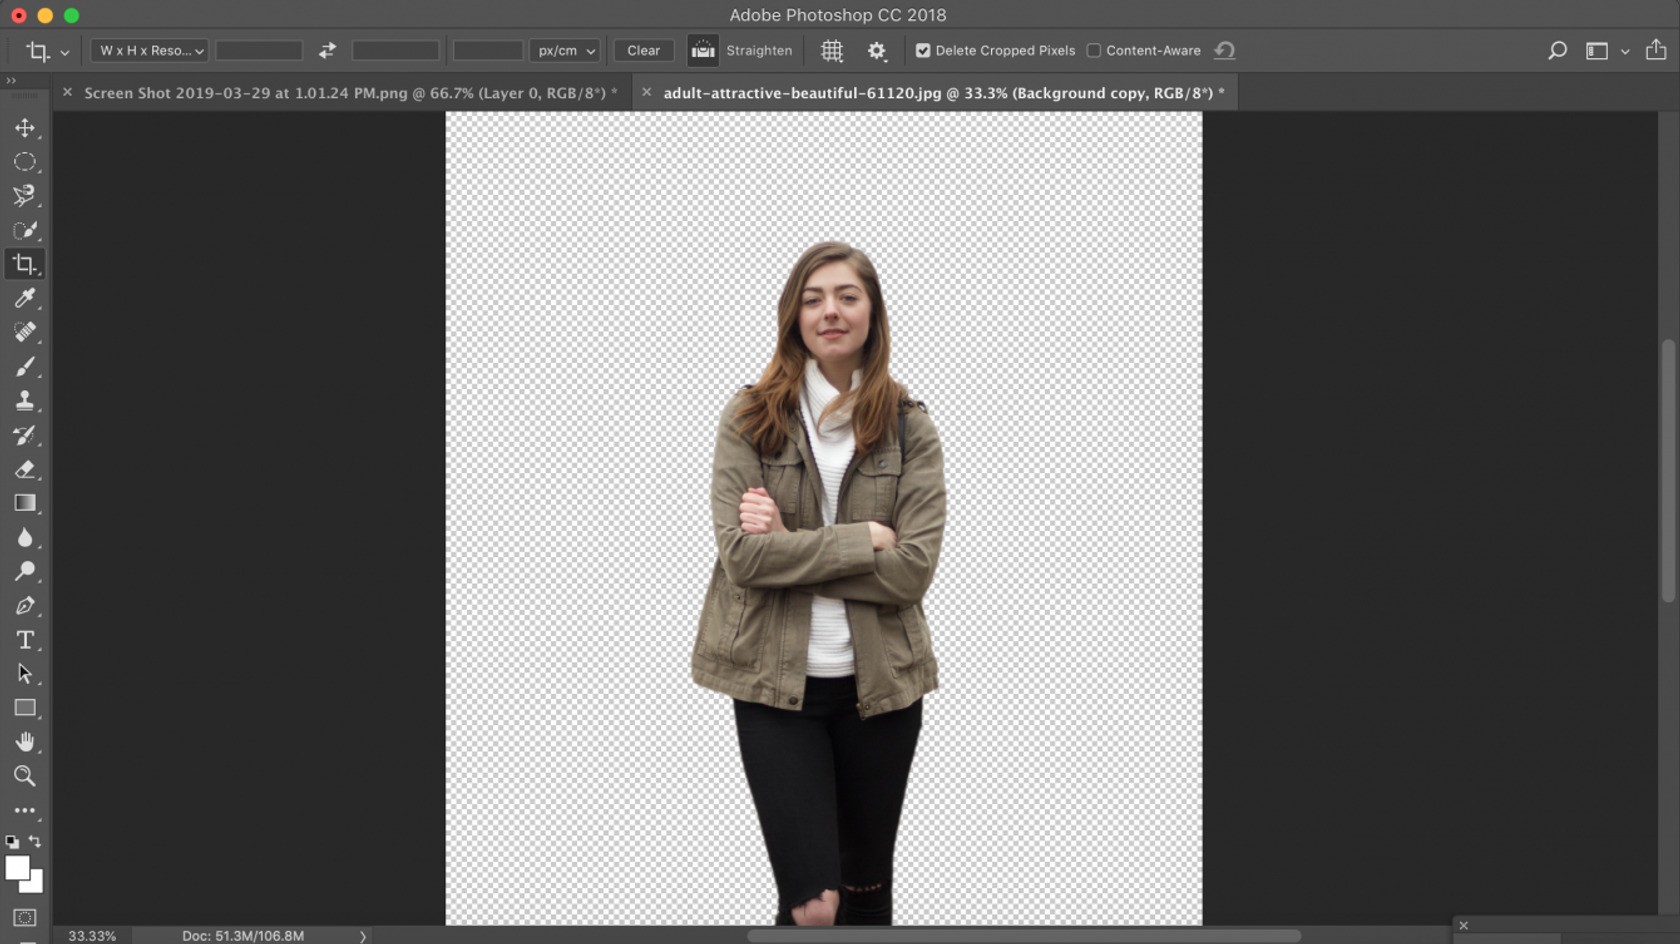 How to Smooth Edges in Photoshop: Photoshop Feather and Other Tools Image8